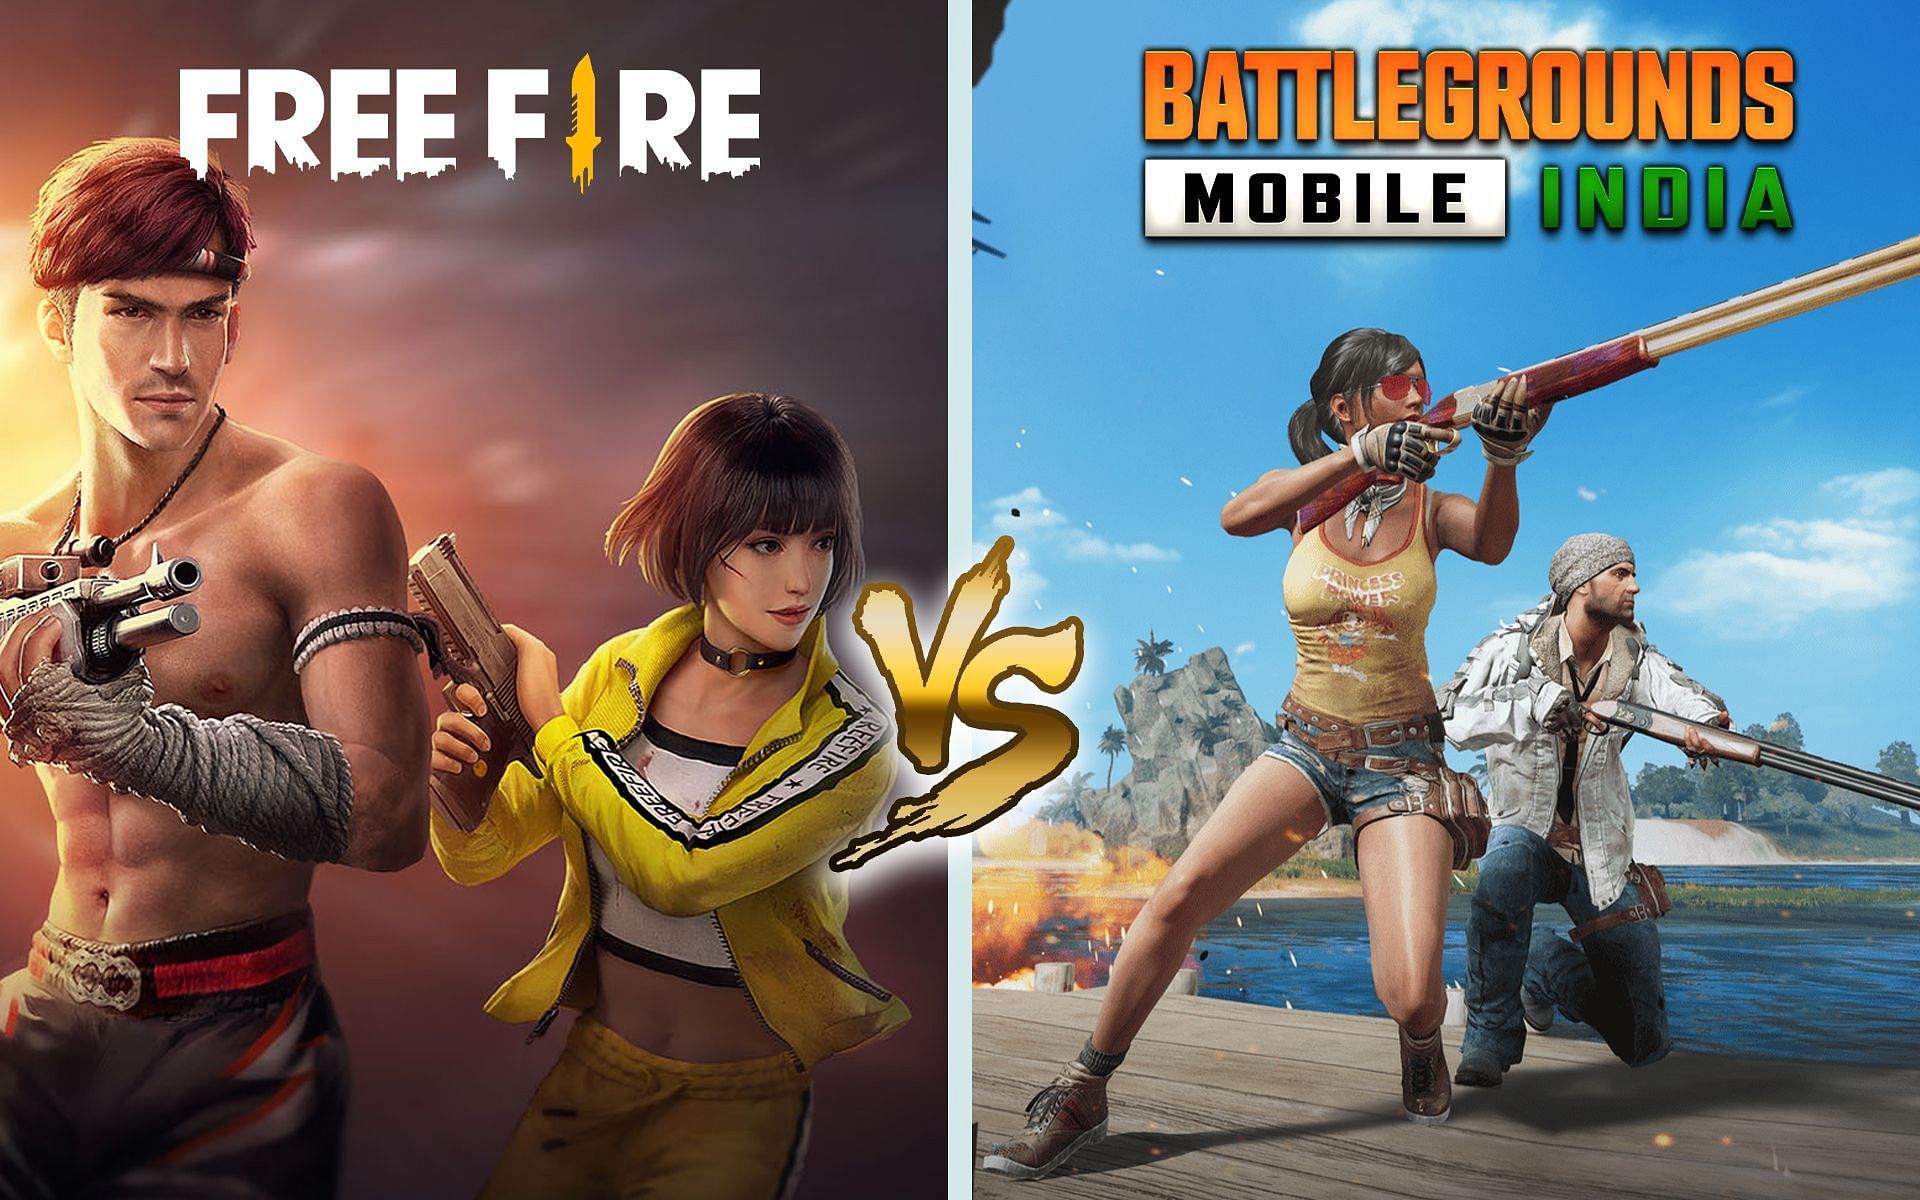 Garena Free Fire: is this a better PUBG? One battle royale to rule them all